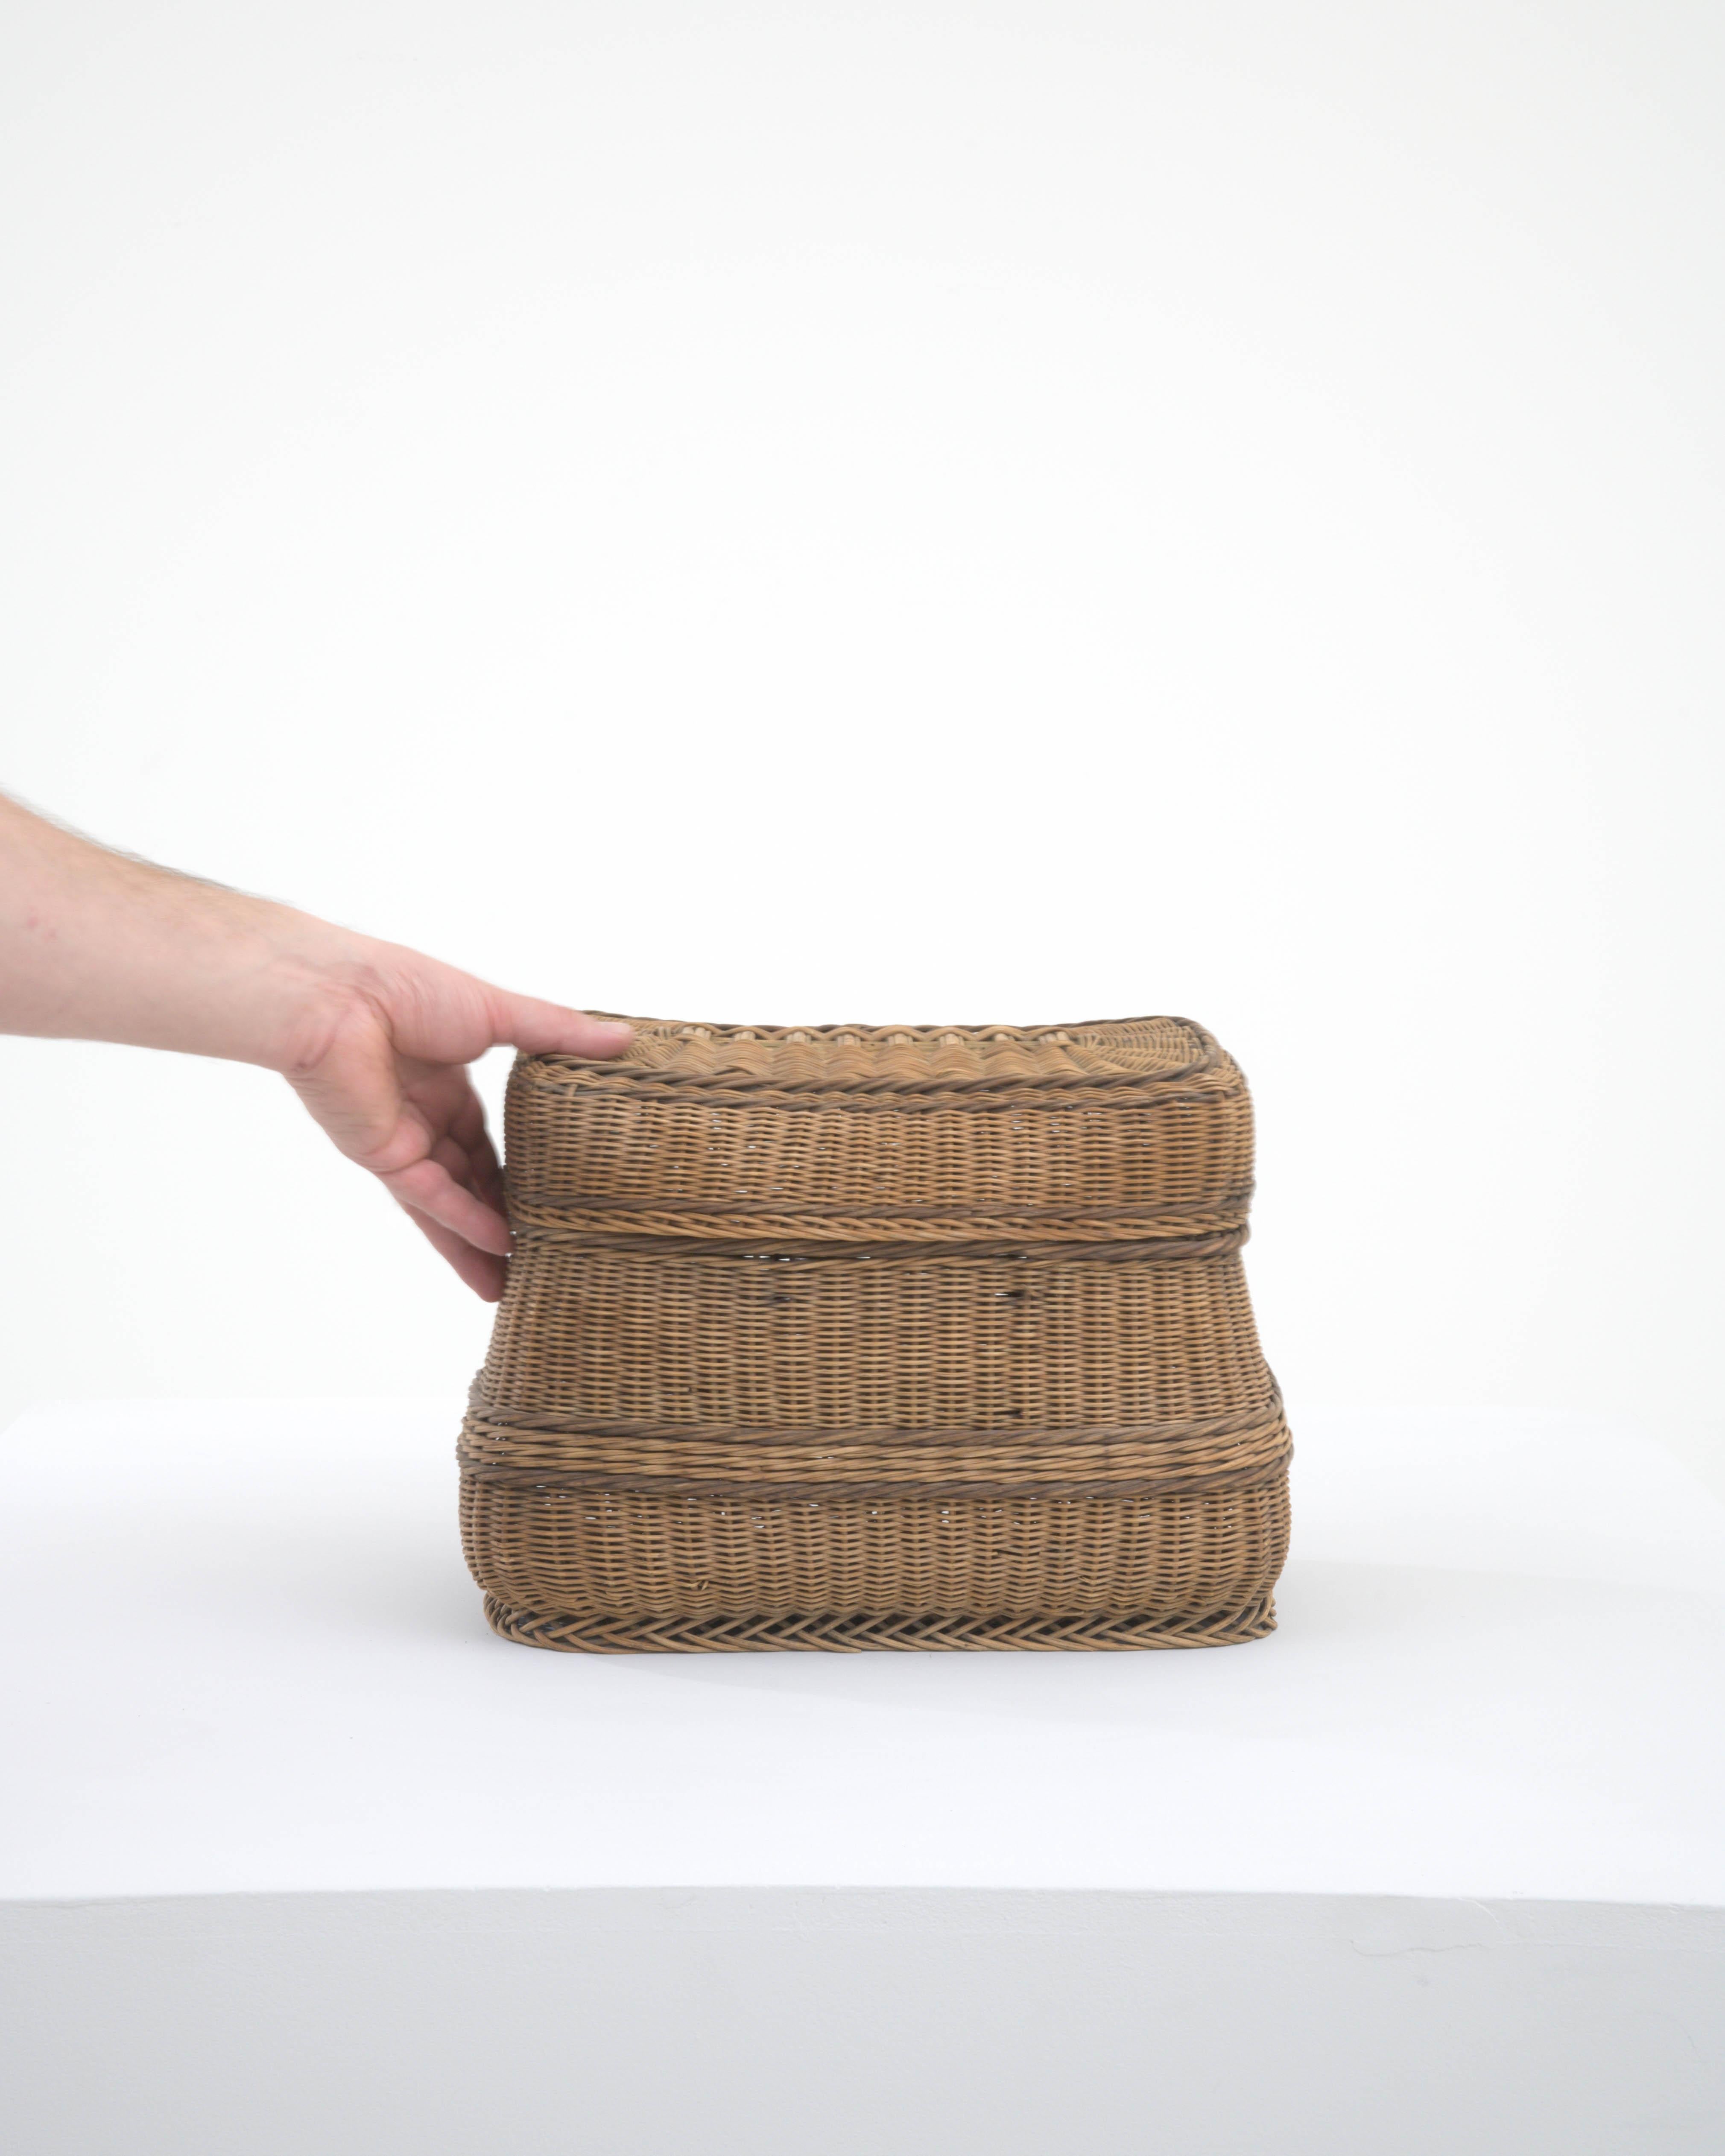 Discover the rustic charm of this 20th Century French Wicker Basket, a versatile and timeless addition to your home decor. Handwoven with meticulous care, this basket showcases the intricate craftsmanship of traditional wicker techniques. The